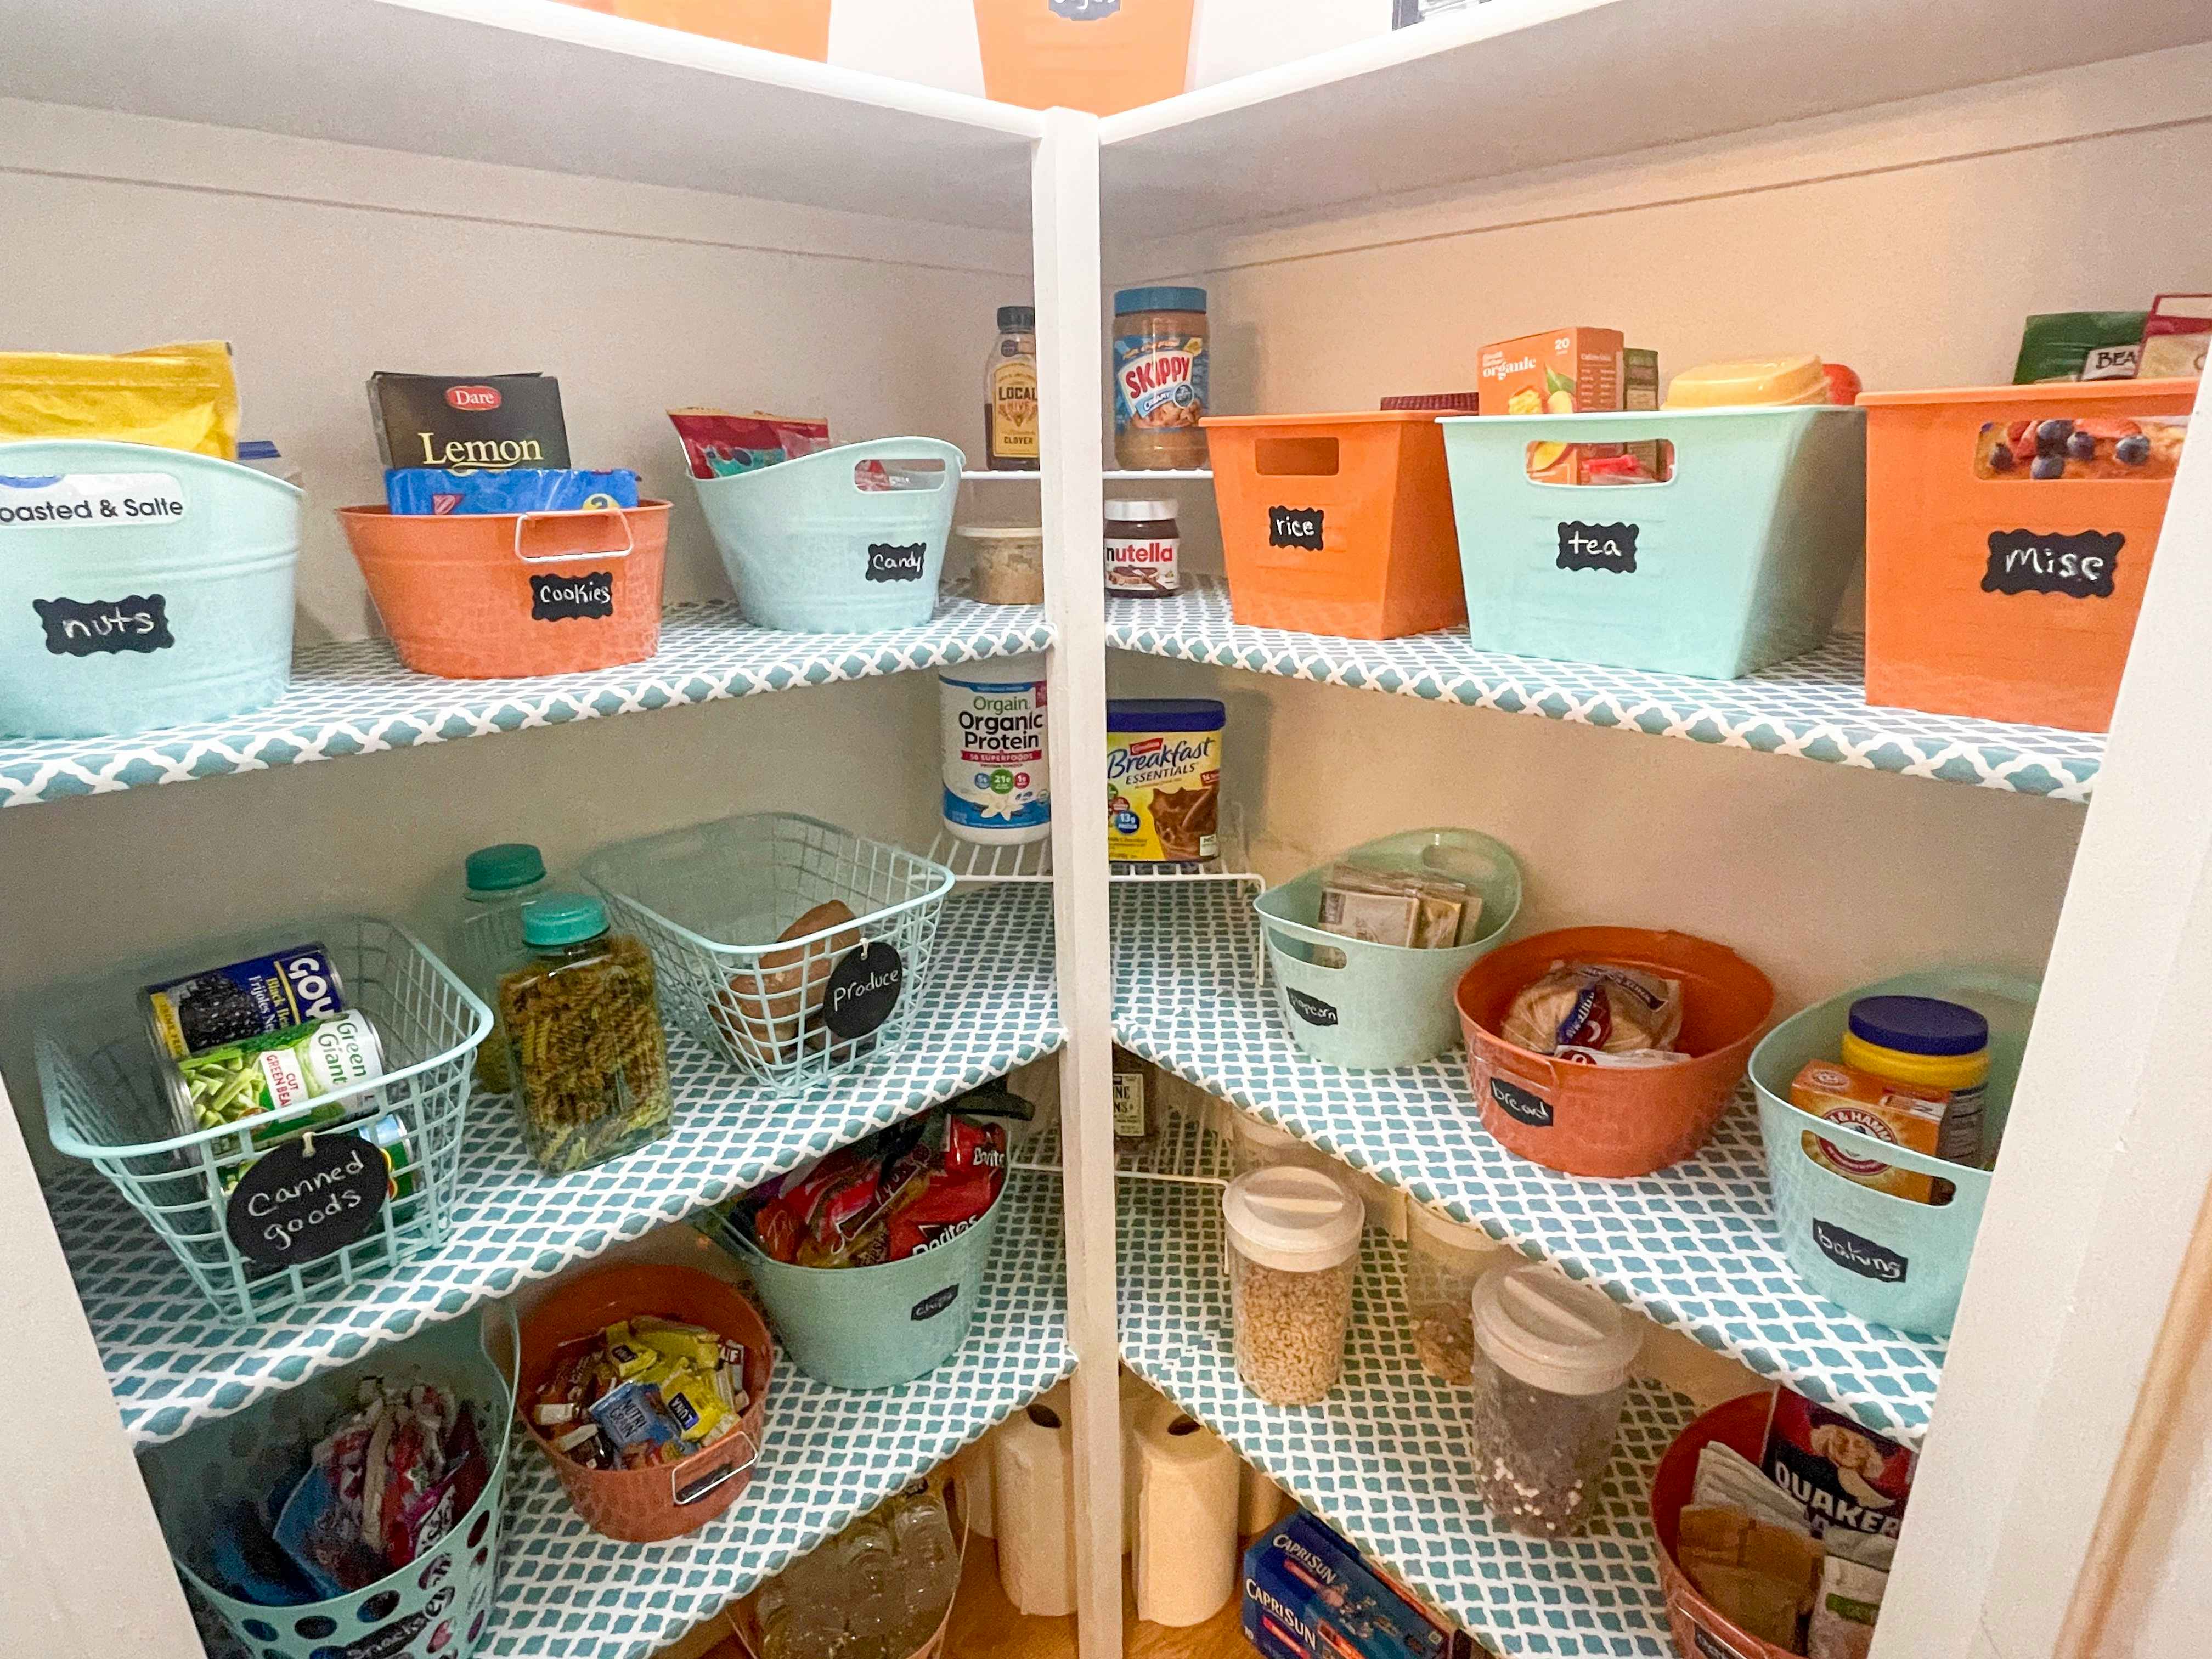 The Best Space-Saving Pantry Organization Ideas Start at $15 at